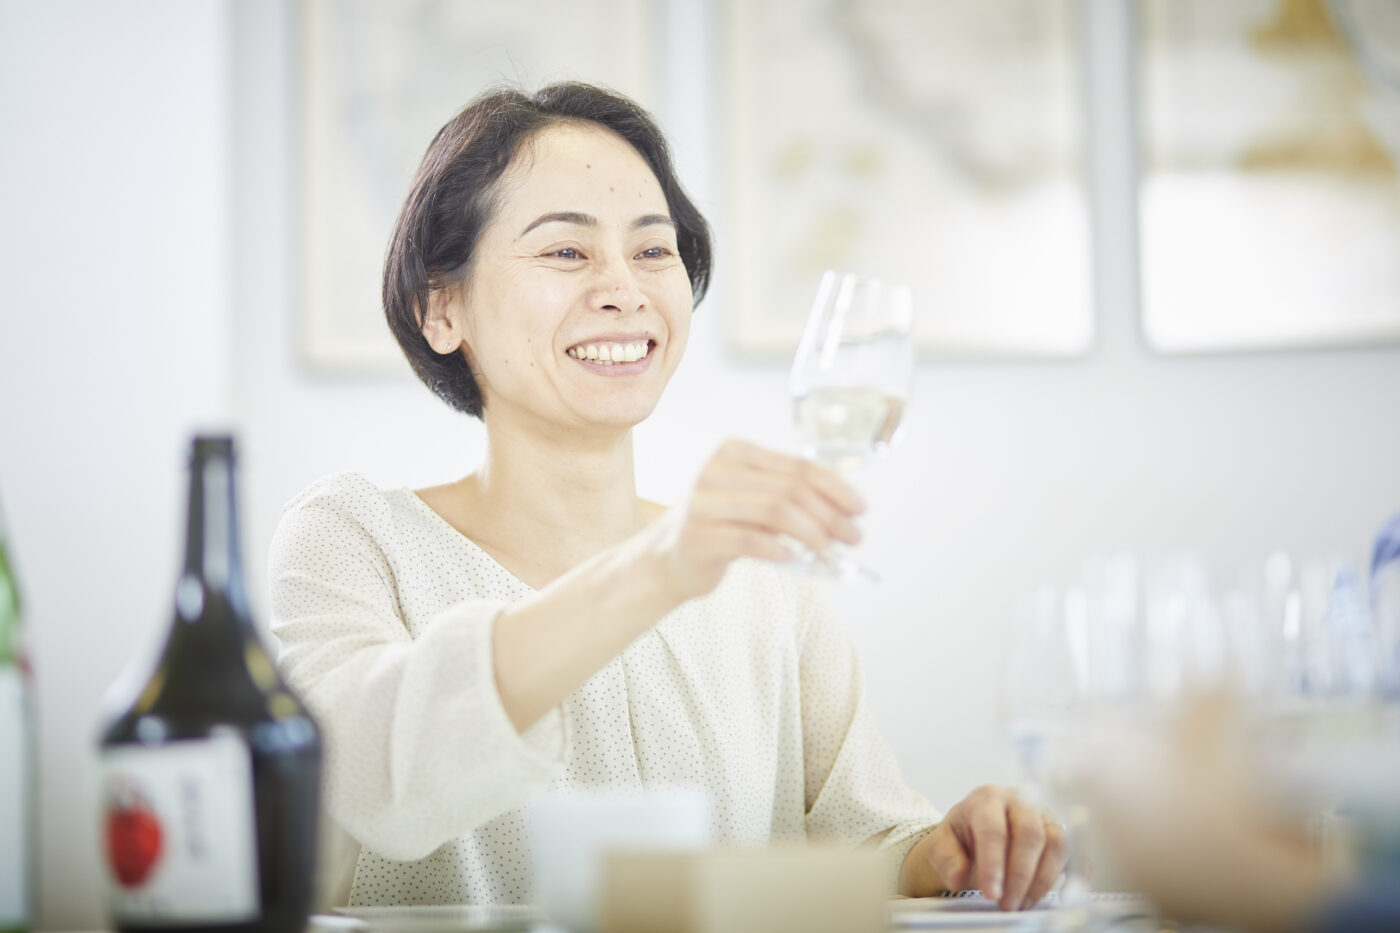 Woman holding up a sake glass and smiling